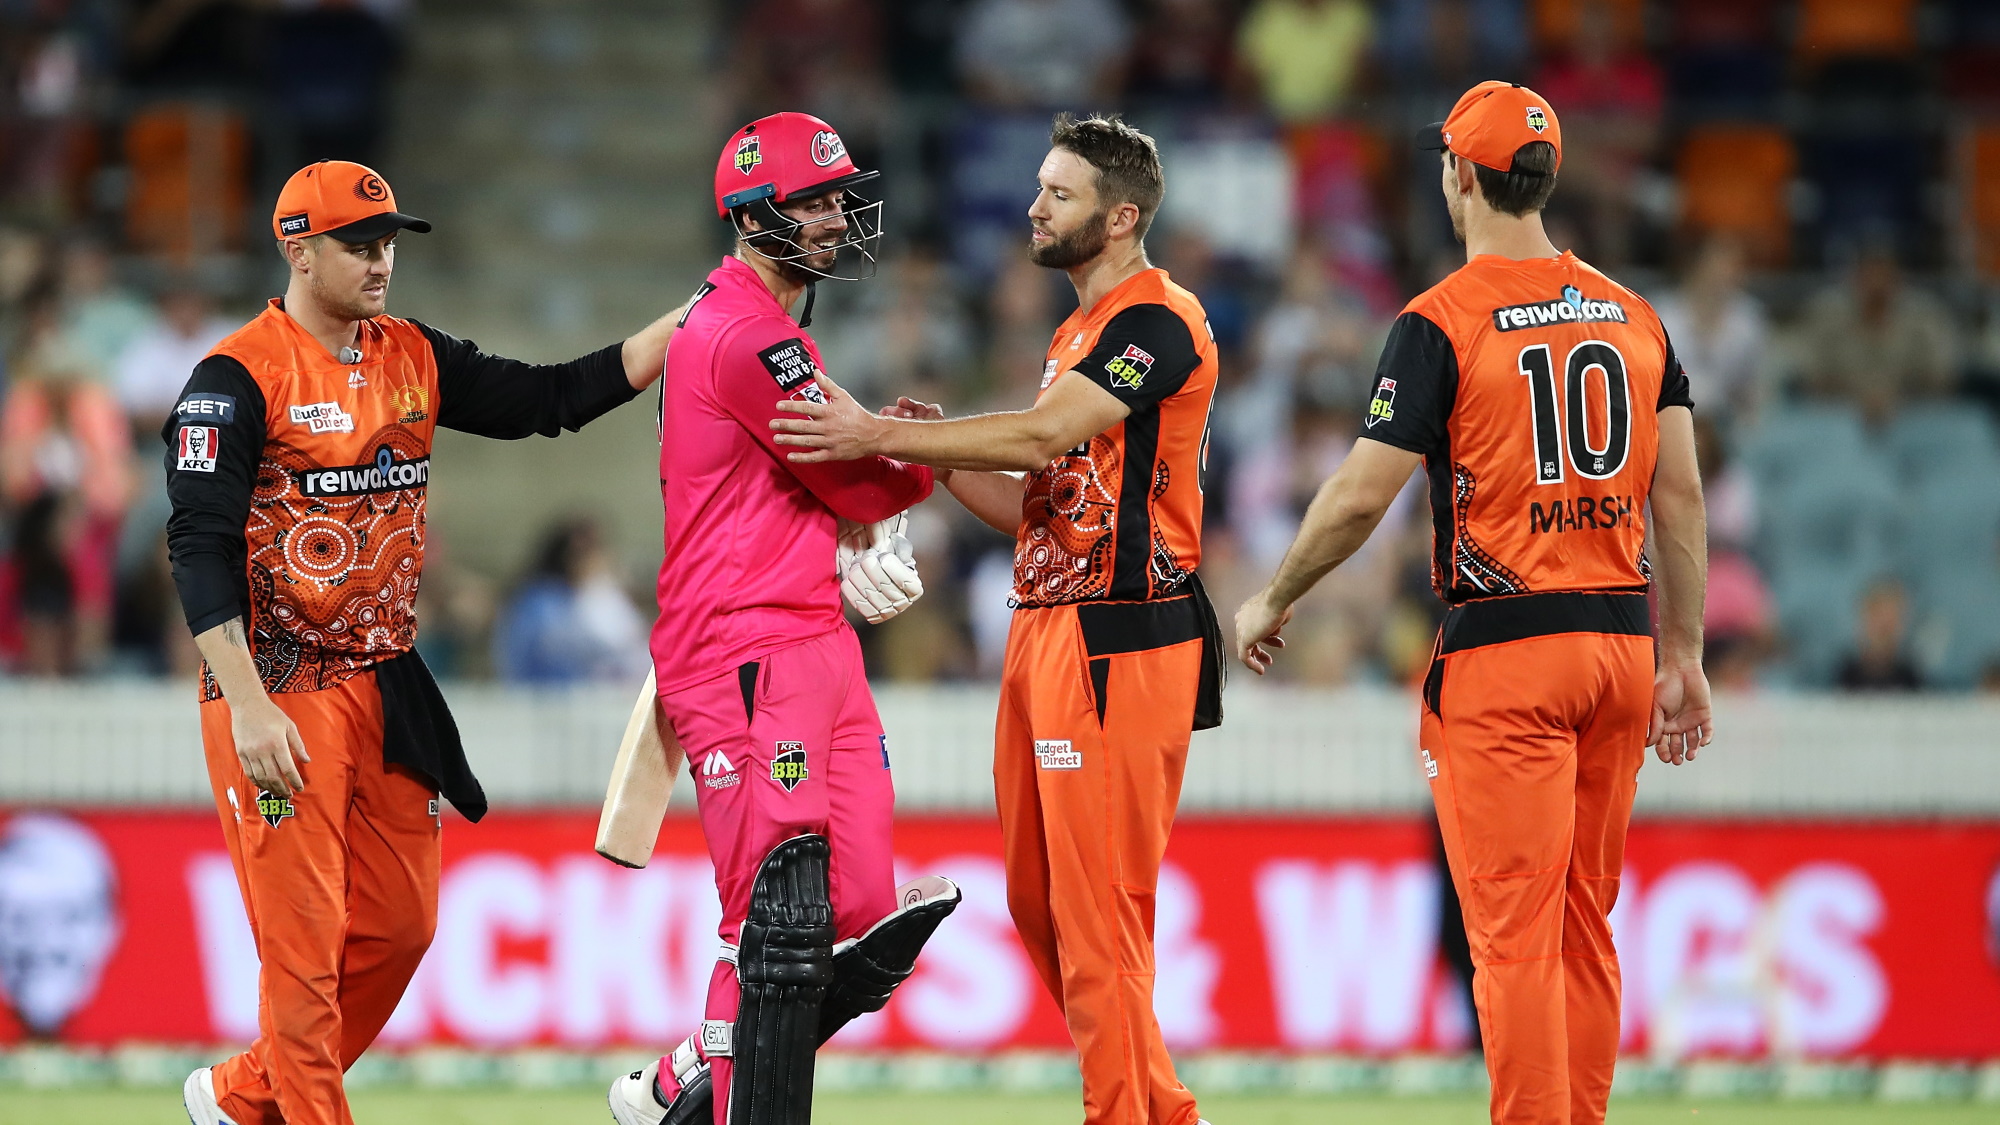 Sydney Sixers vs Perth Scorchers live stream how to watch Big Bash